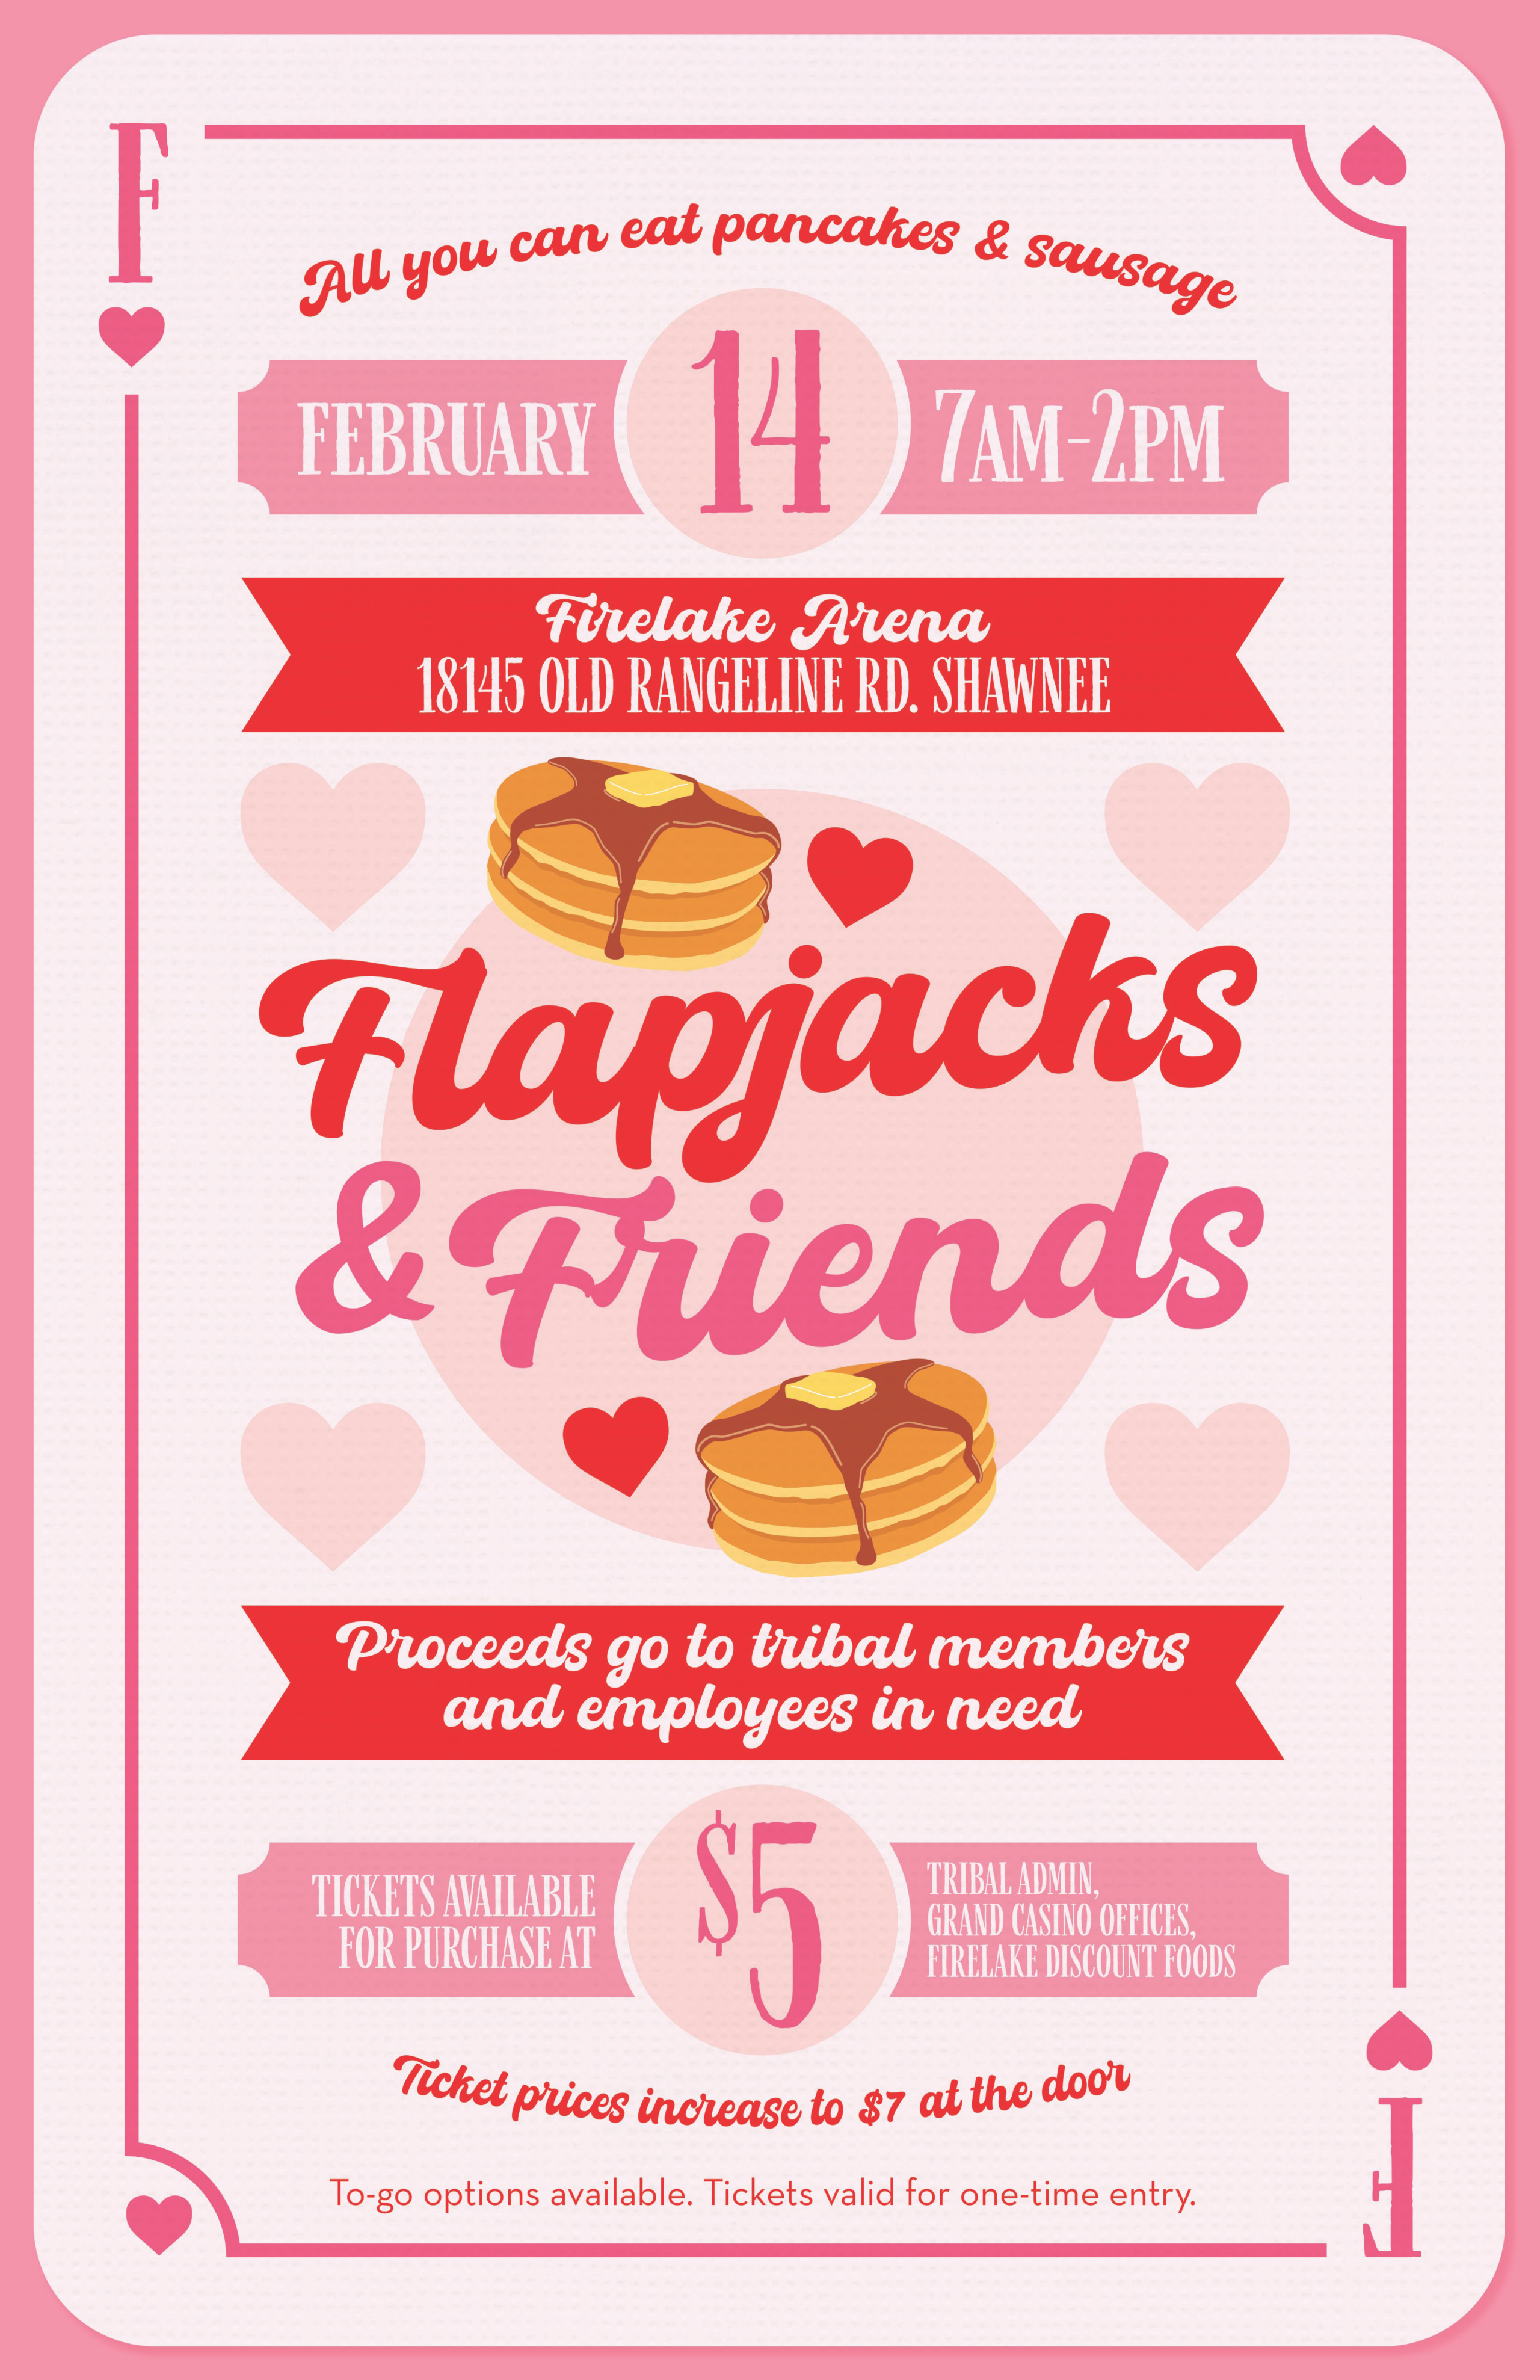 Event flyer styled as a pink playing card in the hearts suit.